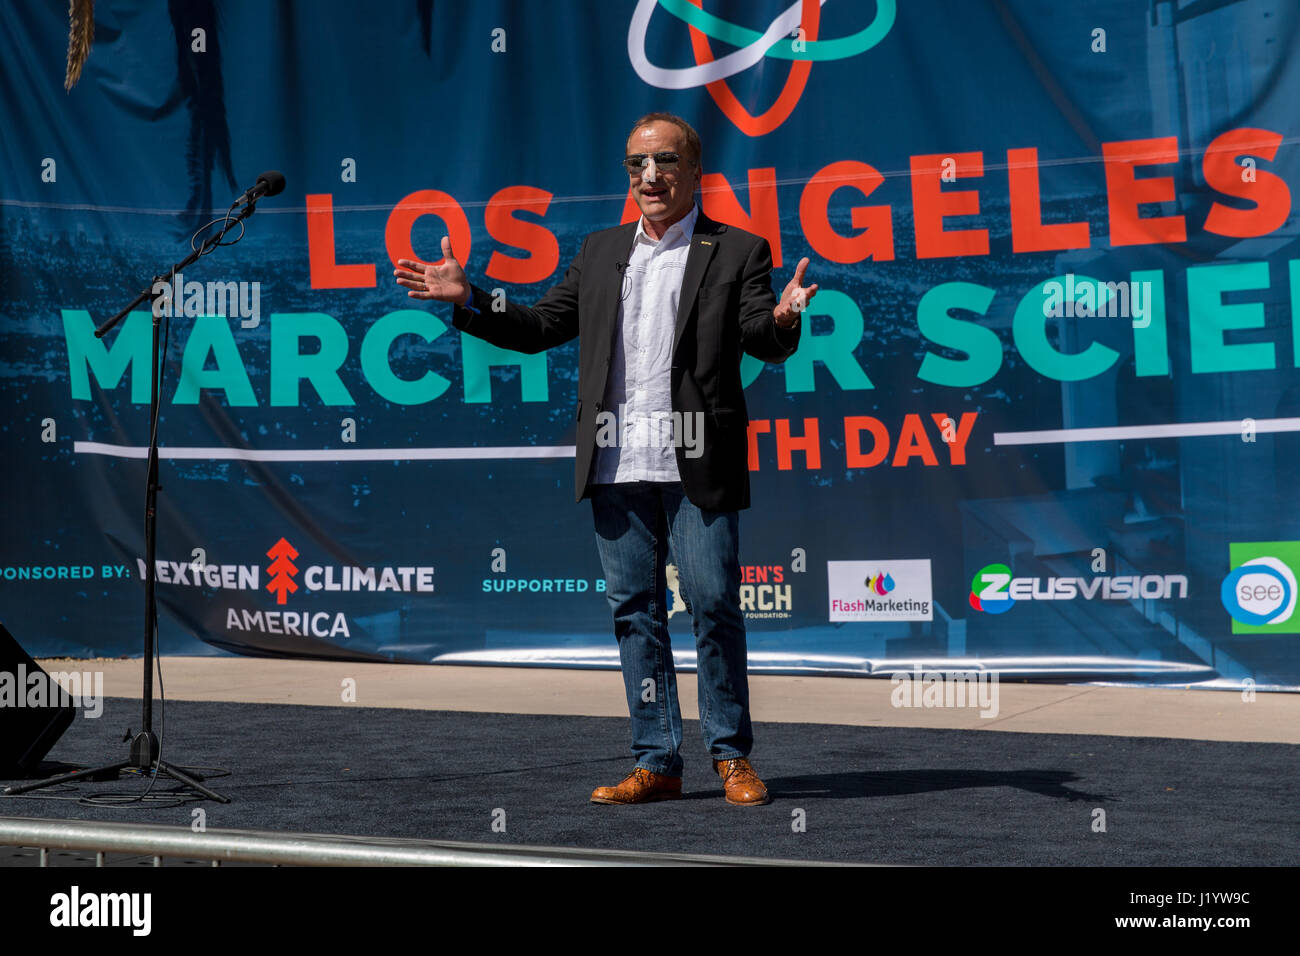 Science writer Michael Shermer speaks at the Los Angeles March For Science in Pershing Square, Downtown L.A. on Earth Day, April 22nd, 2017. Credit: Jim Newberry/Alamy Live News Stock Photo